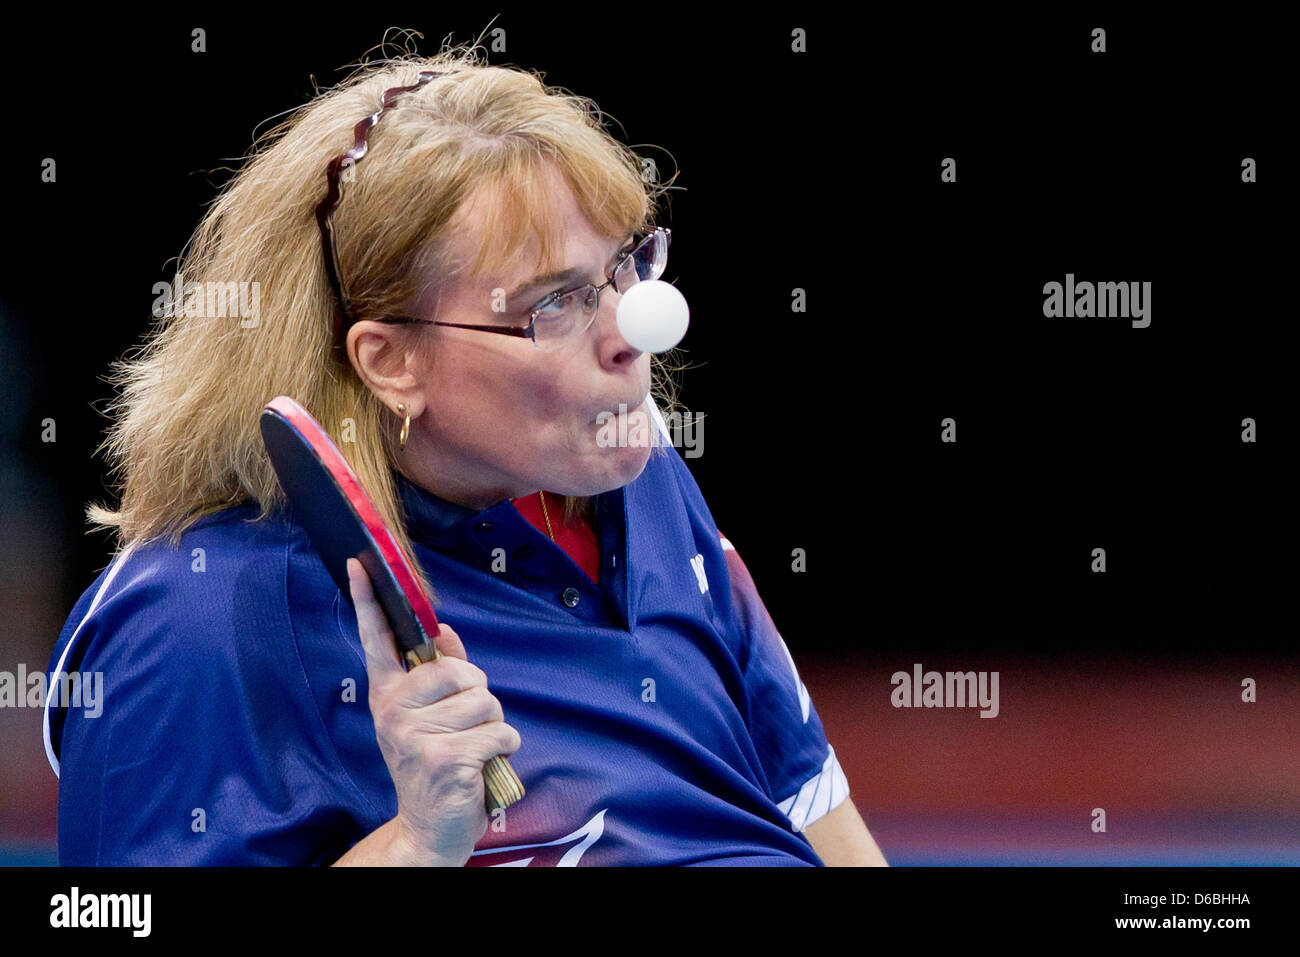 Pamela Fontaine of the USA competes the Table Tennis Women's Singles - Class 3 Preliminary event for the London 2012 Paralympic Games at the ExCel Centre, Great Britain, 31 August 2012. Photo: Daniel Karmann dpa  +++(c) dpa - Bildfunk+++ Stock Photo